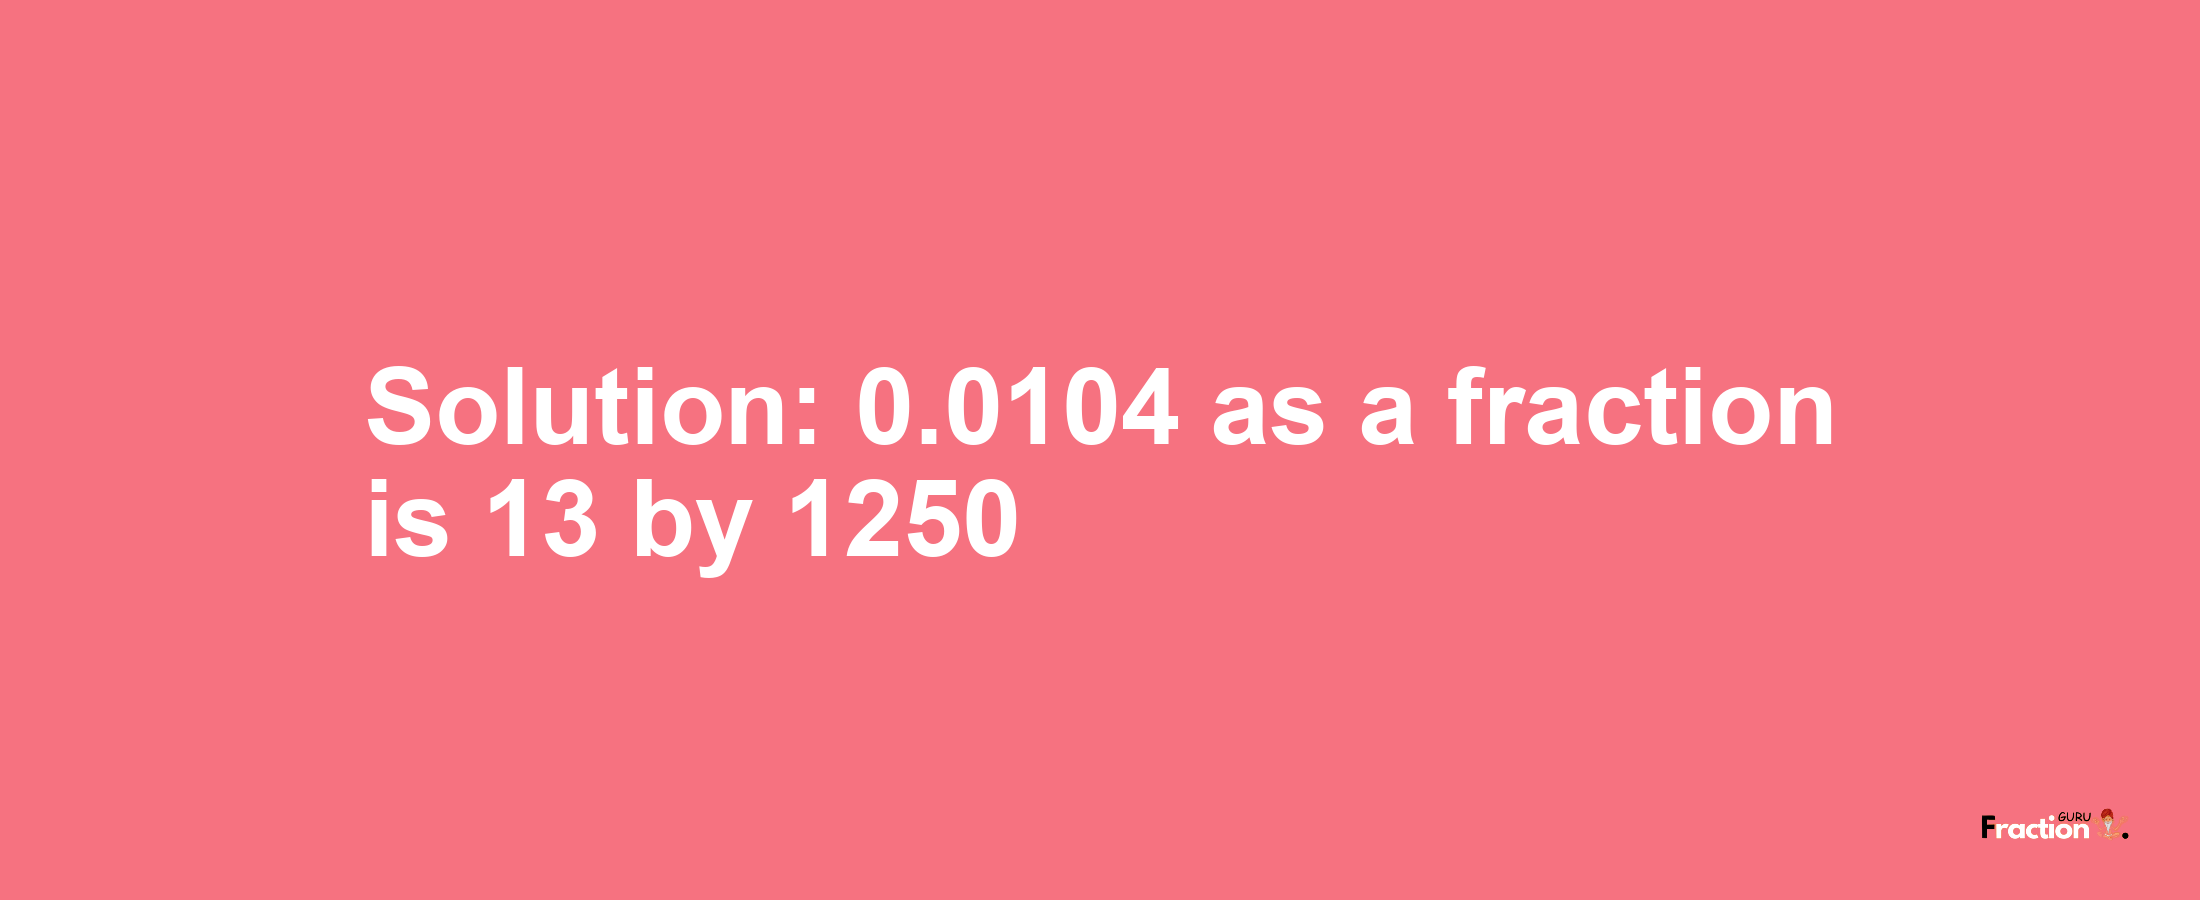 Solution:0.0104 as a fraction is 13/1250